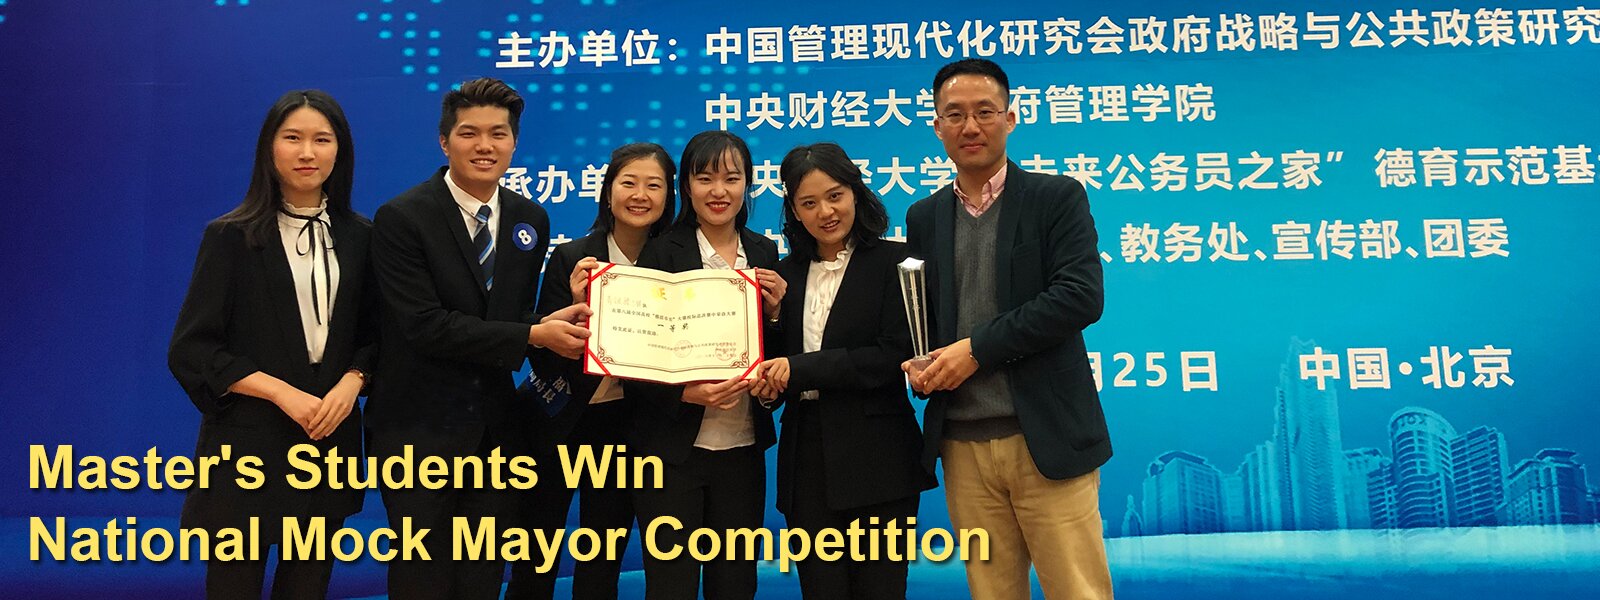 Master's Students Win National Mock Mayor Competition